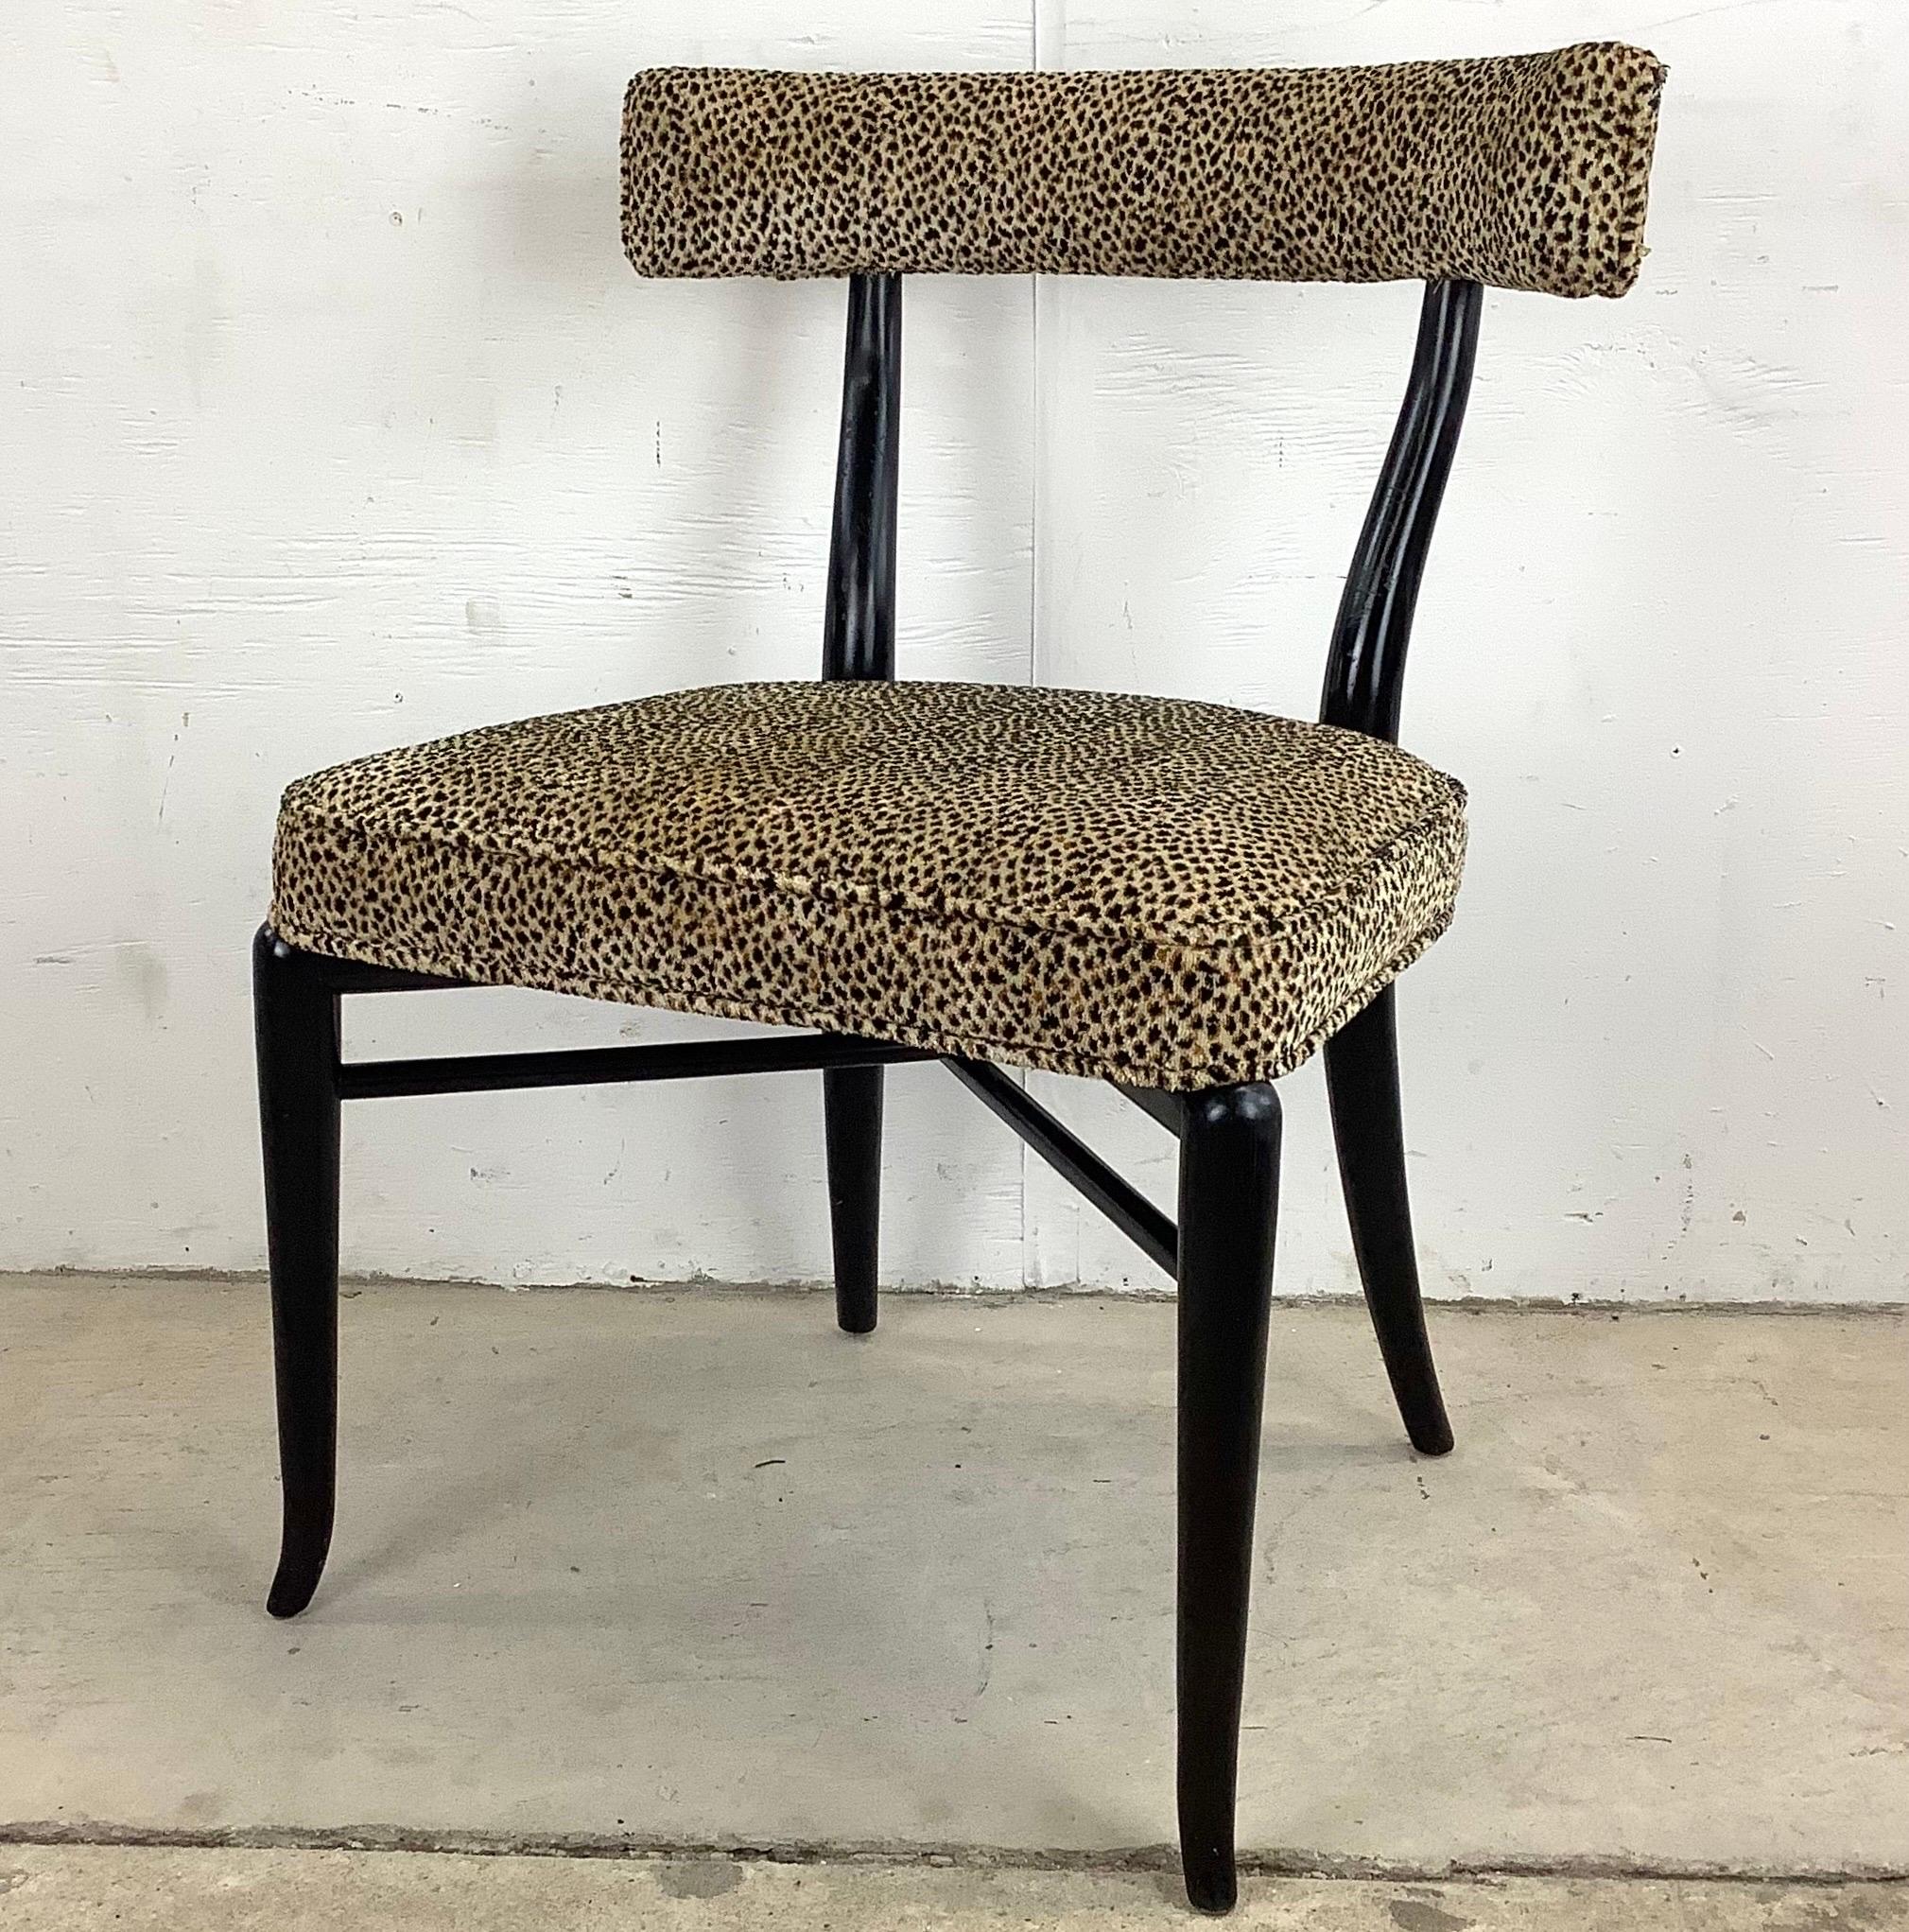 This impressive midcentury Klismos chair features the distinctive sculptural style of reknown designer T.H. Robsjohn Gibbings- this vintage chair has a black lacquer finish and unique leopard print upholstery and makes a striking side chair in any